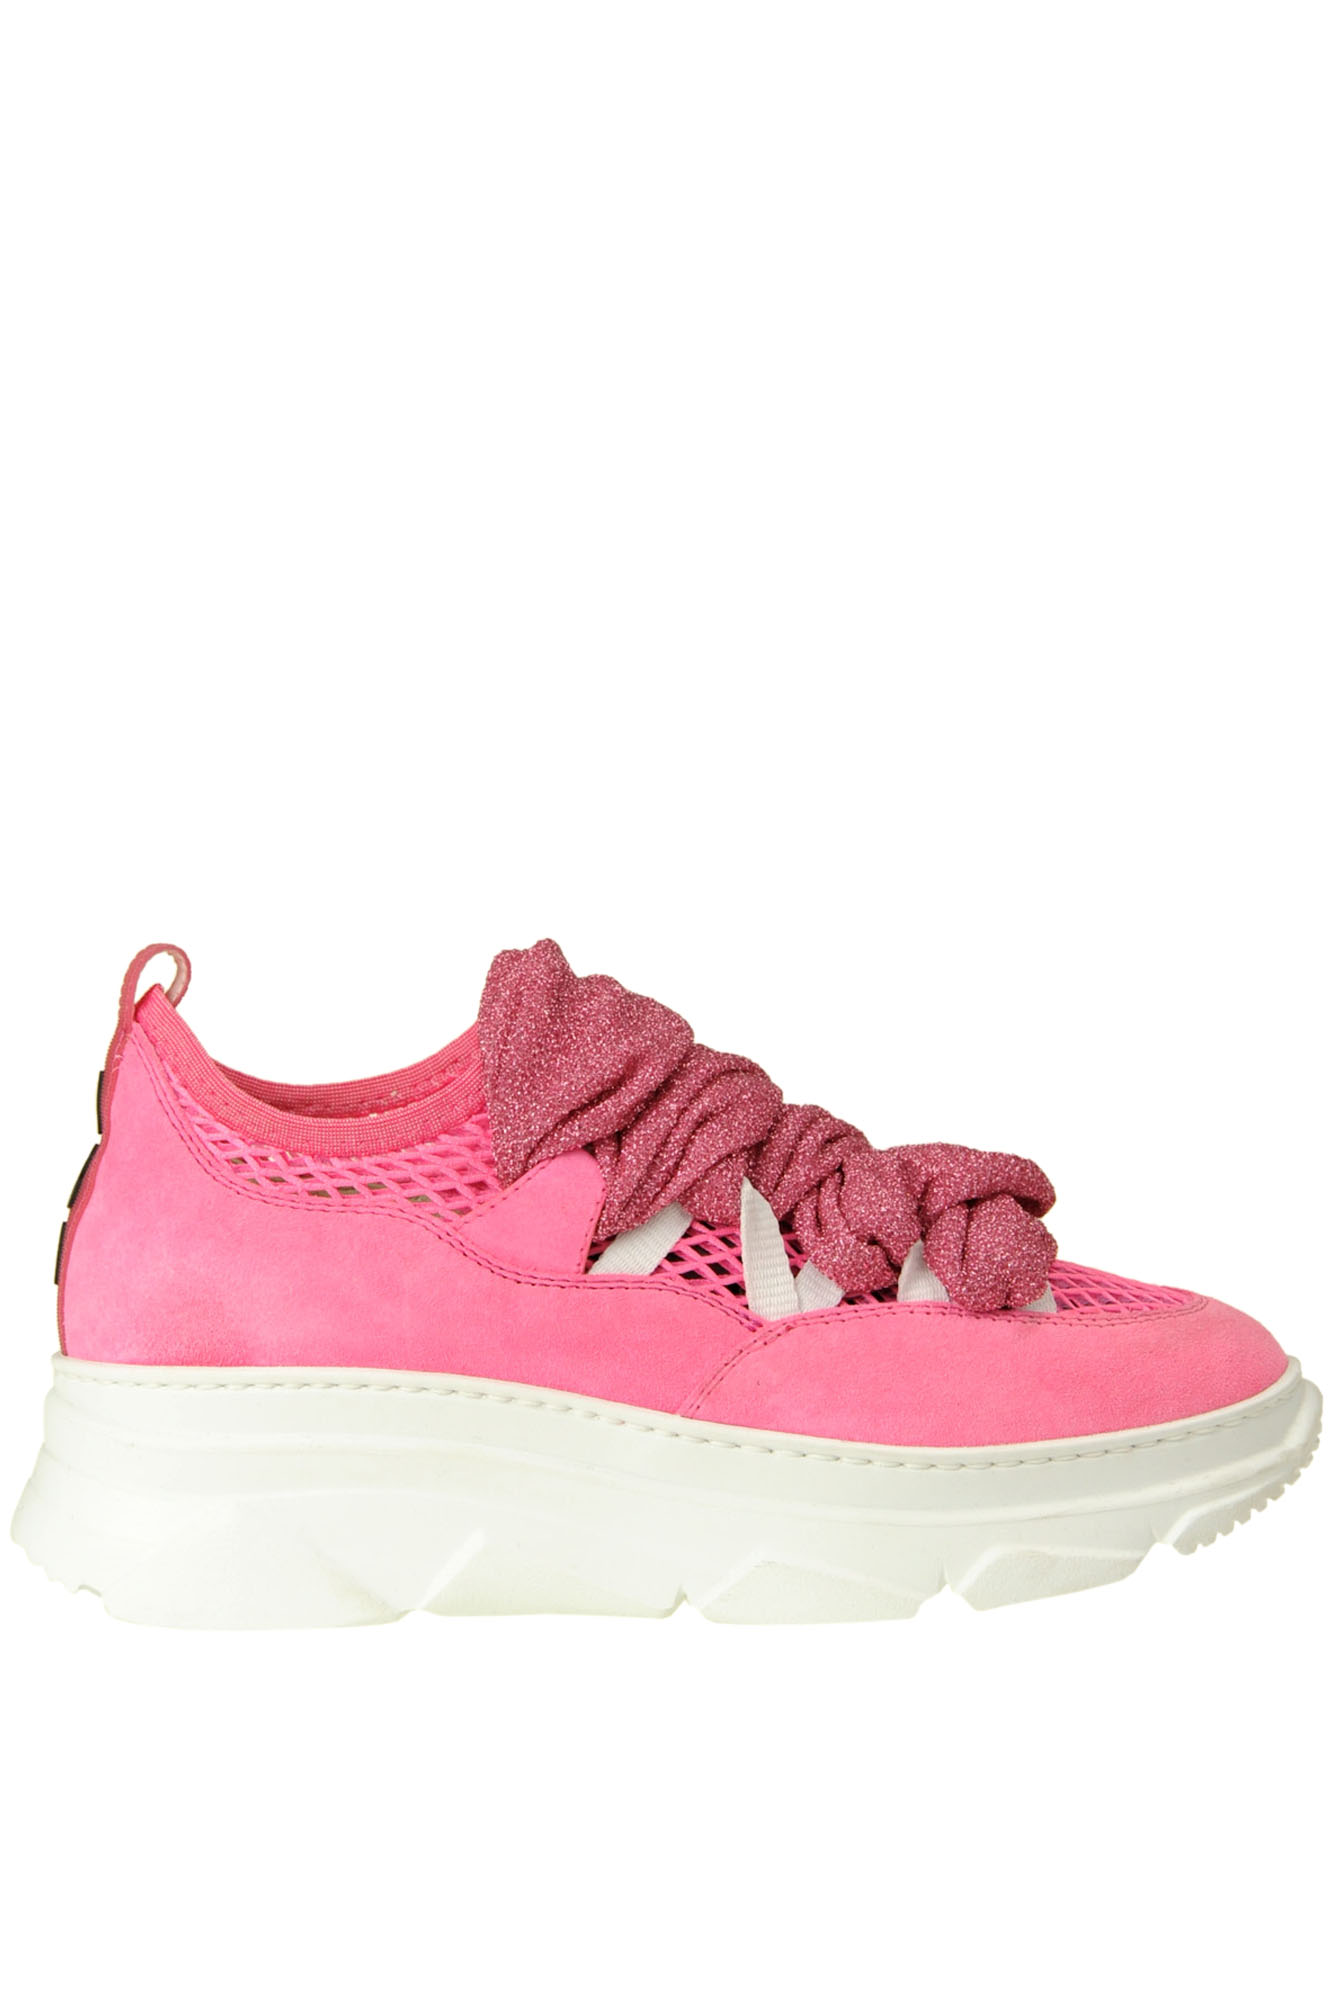 181 Slip-on Sneakers In Fuxia